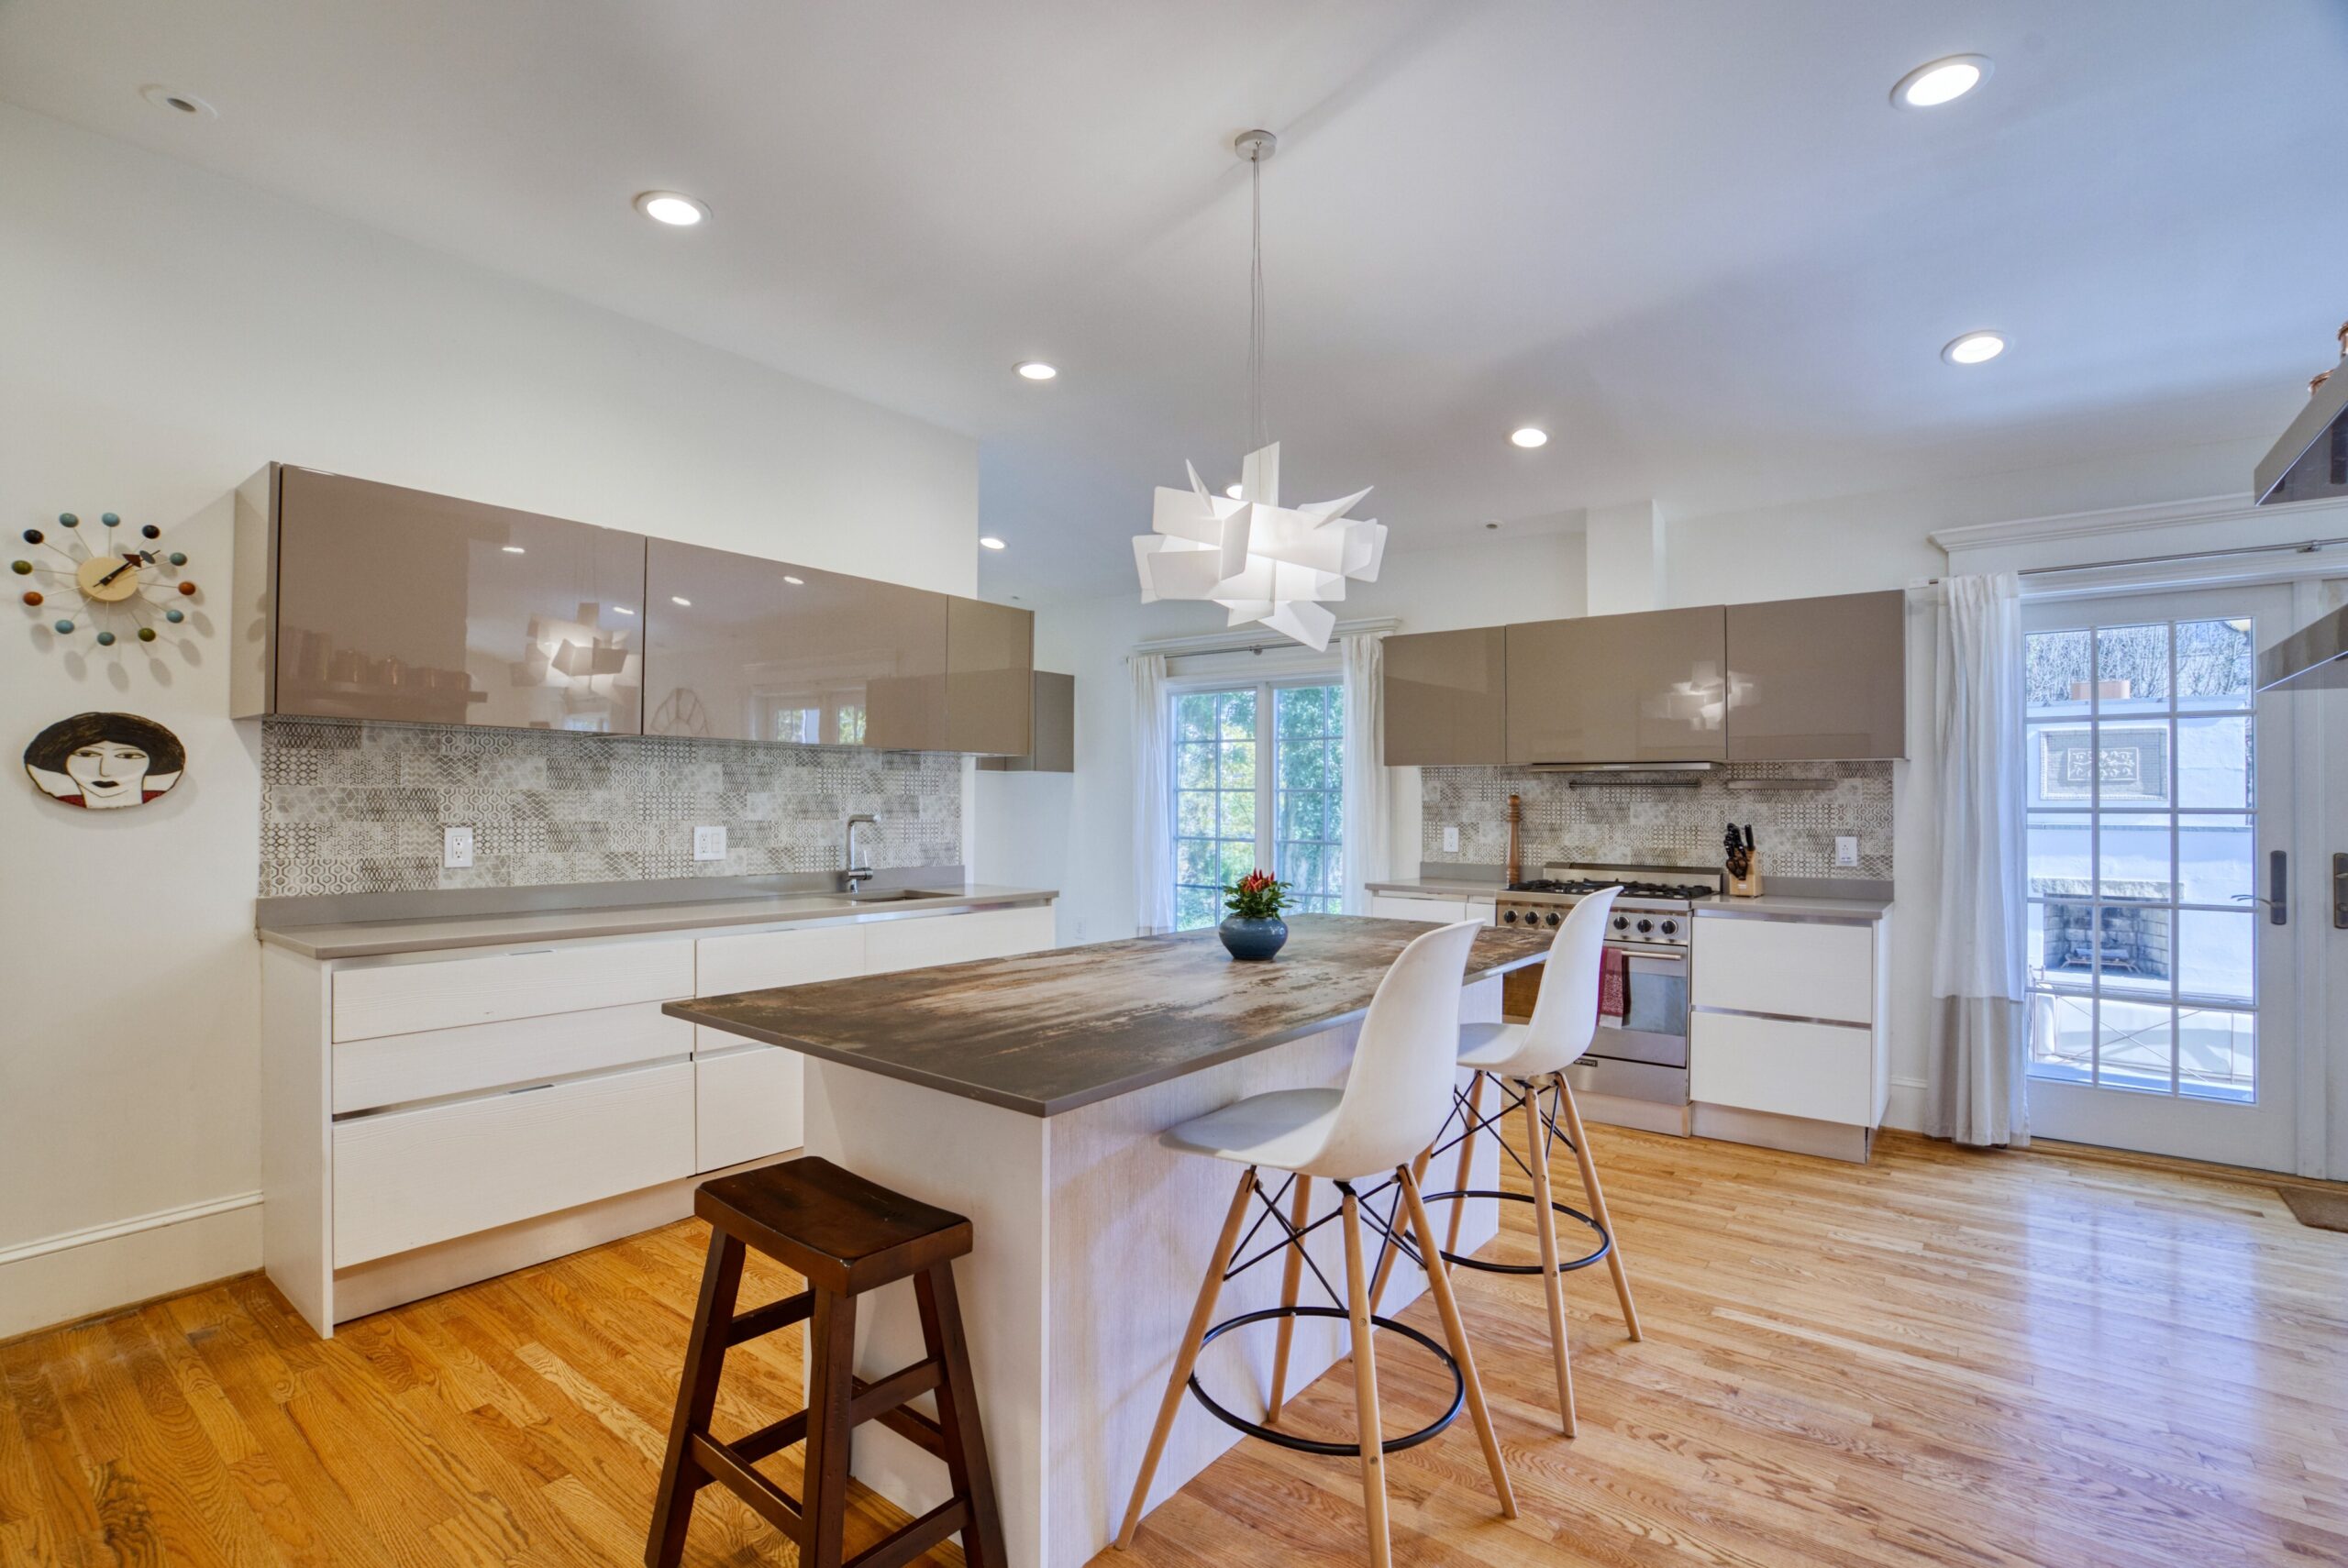 Interior professional photo of 1826 Varnum St NW - showing the kitchen with large island and barstools and very interesting cabinetry